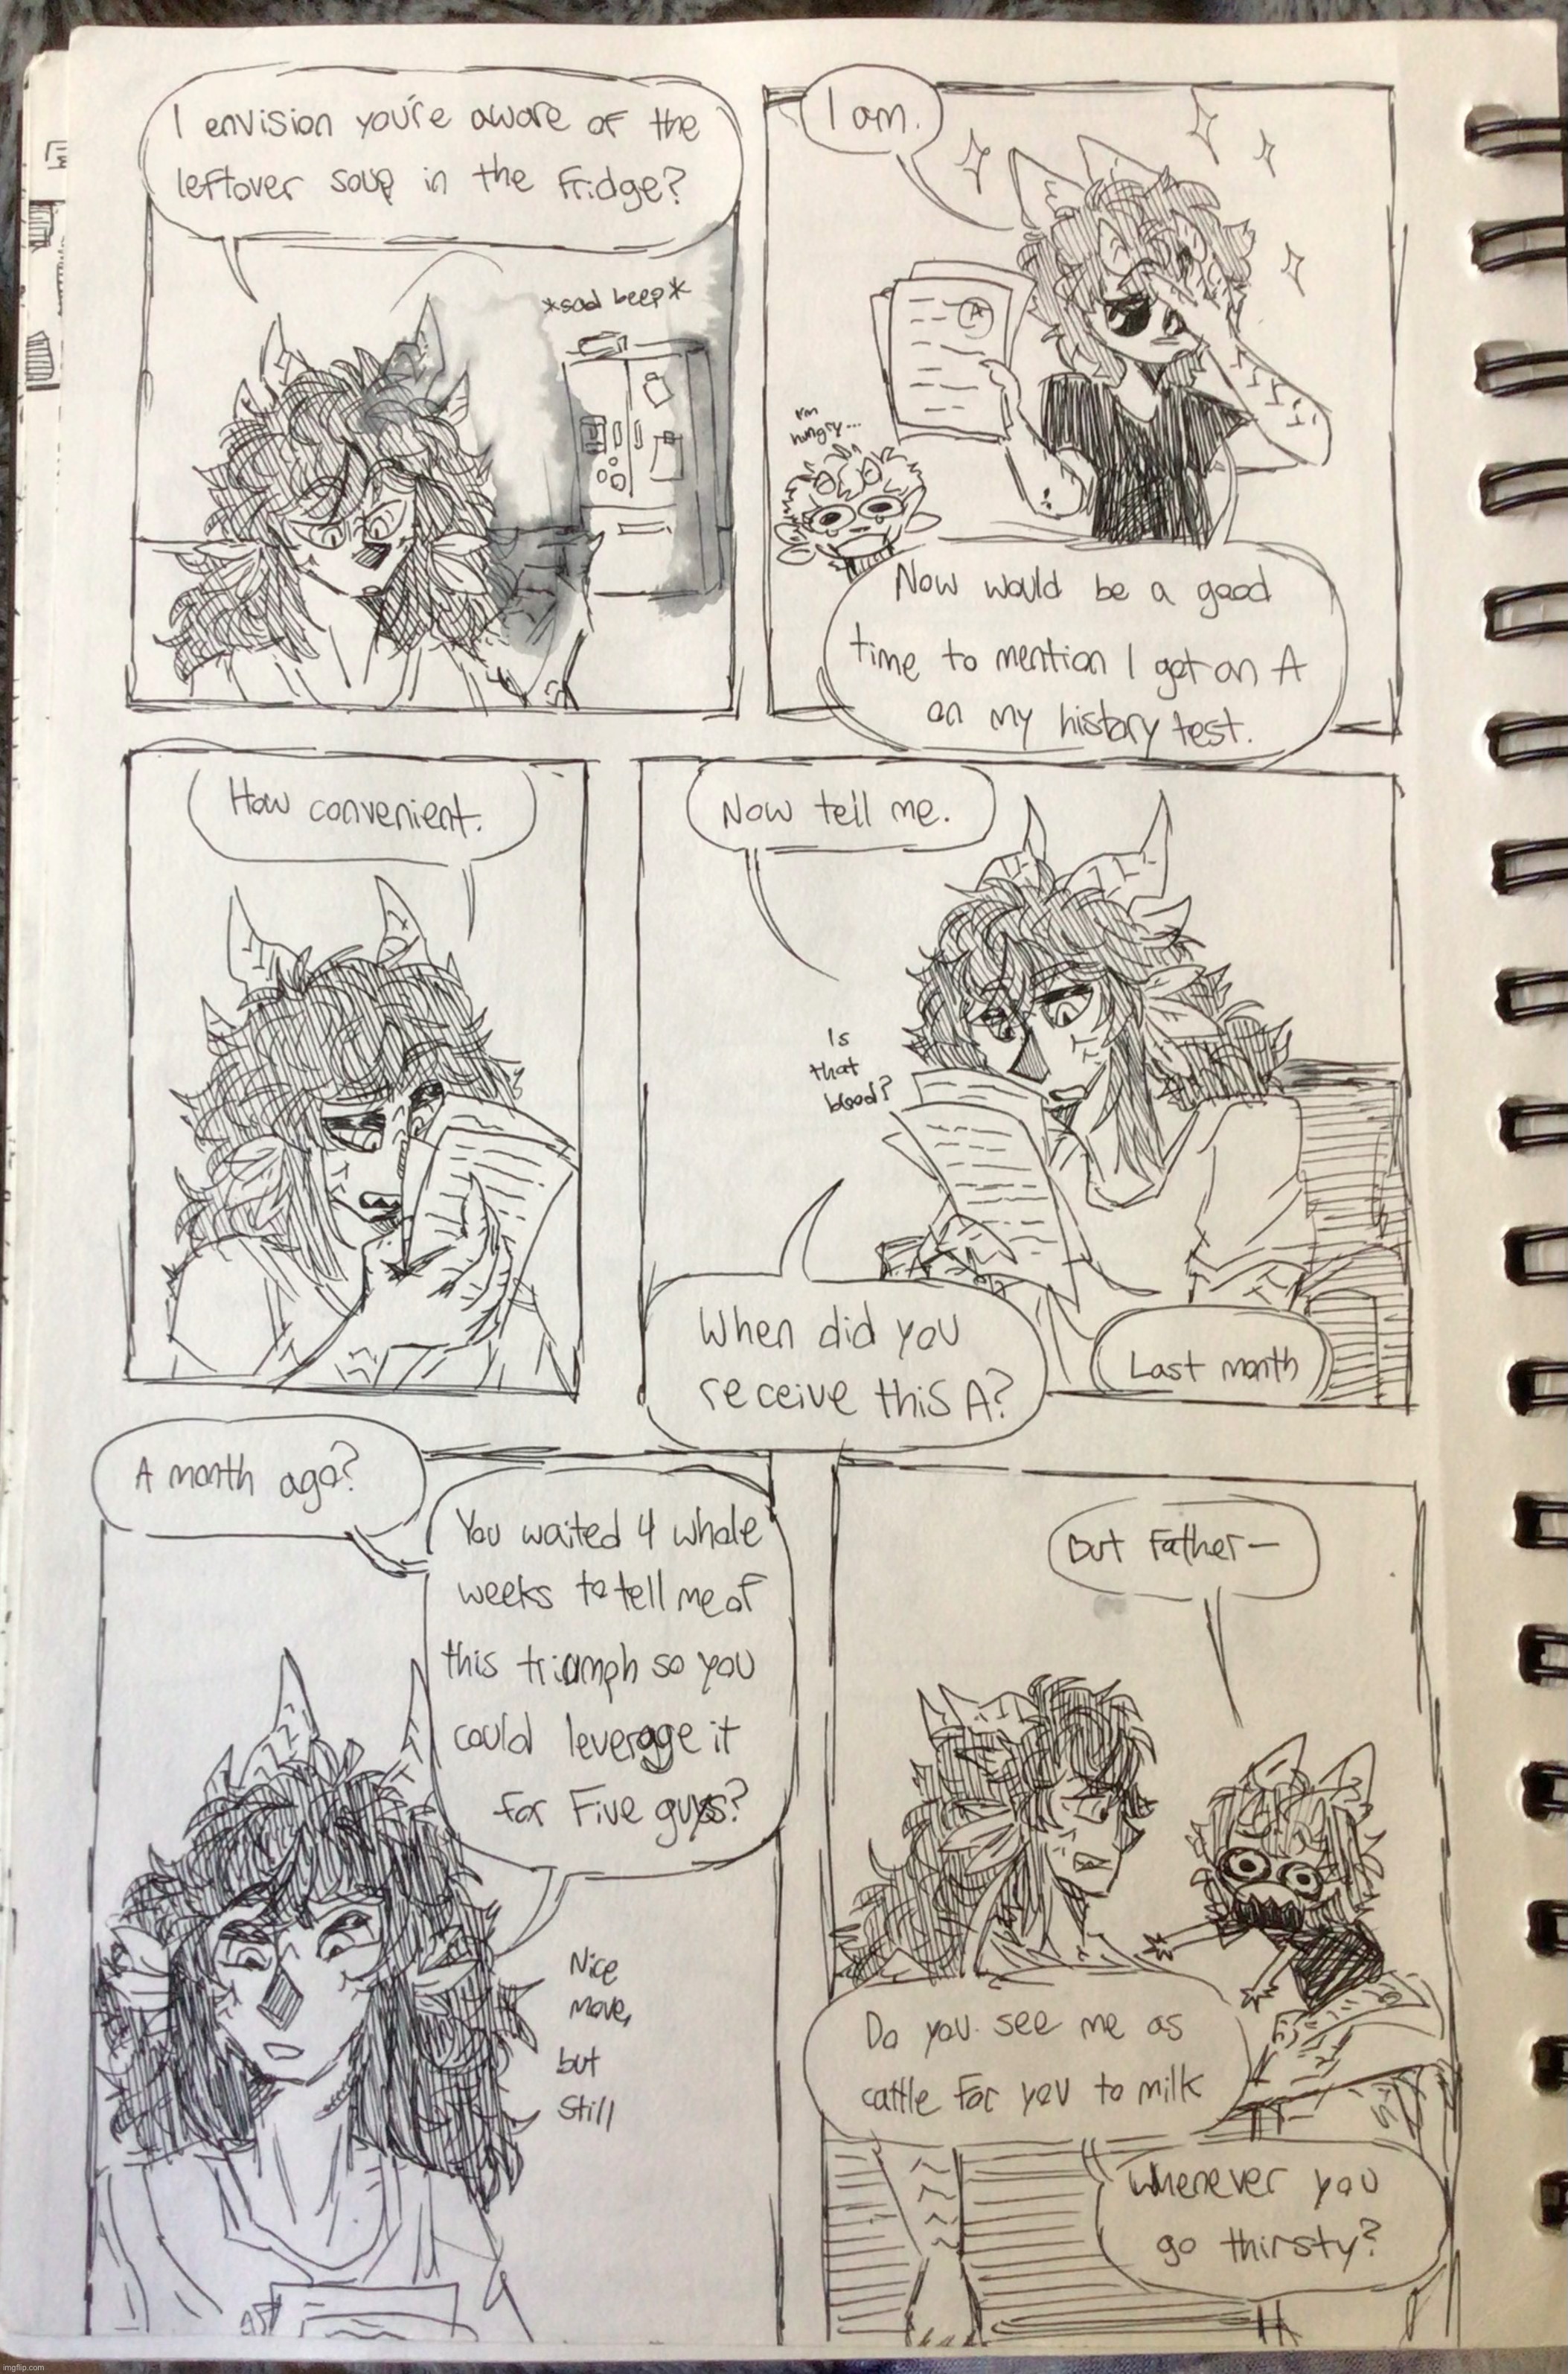 Page 2 of my comic | made w/ Imgflip meme maker